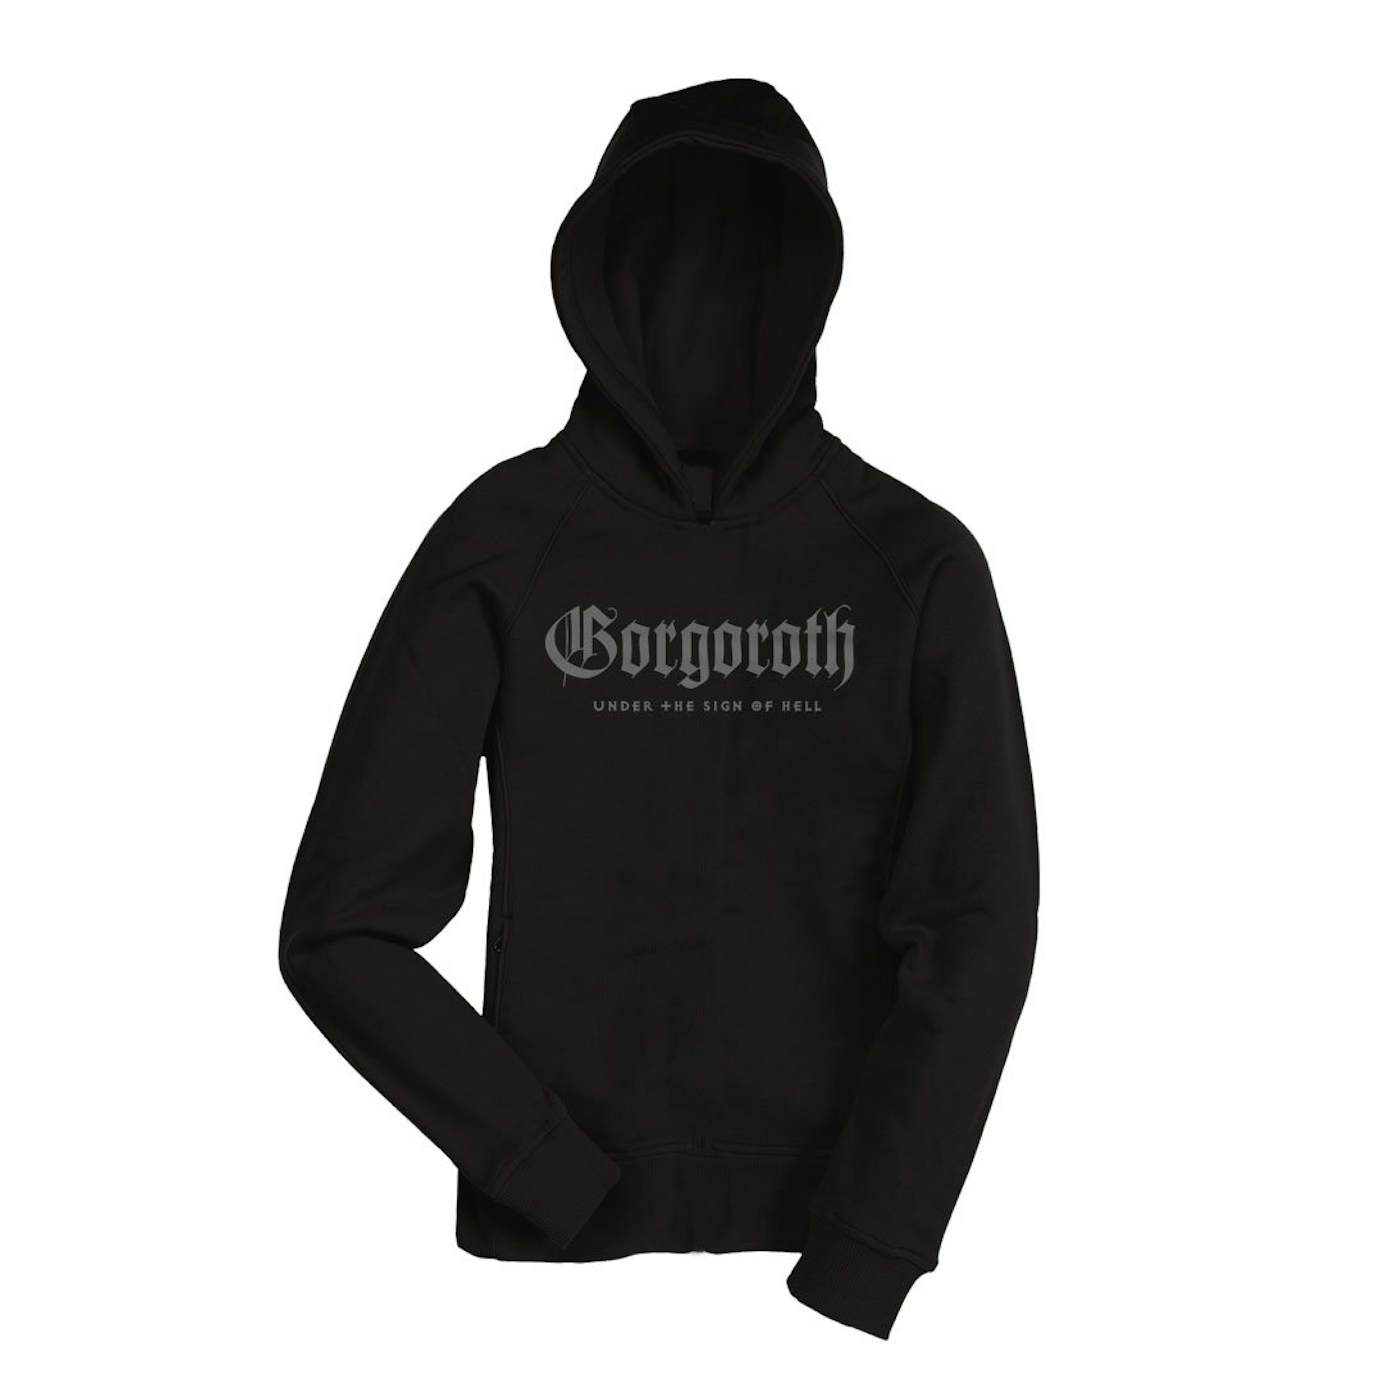 Gorgoroth "Under the sign of hell (Grey print)" Pullover Hoodie